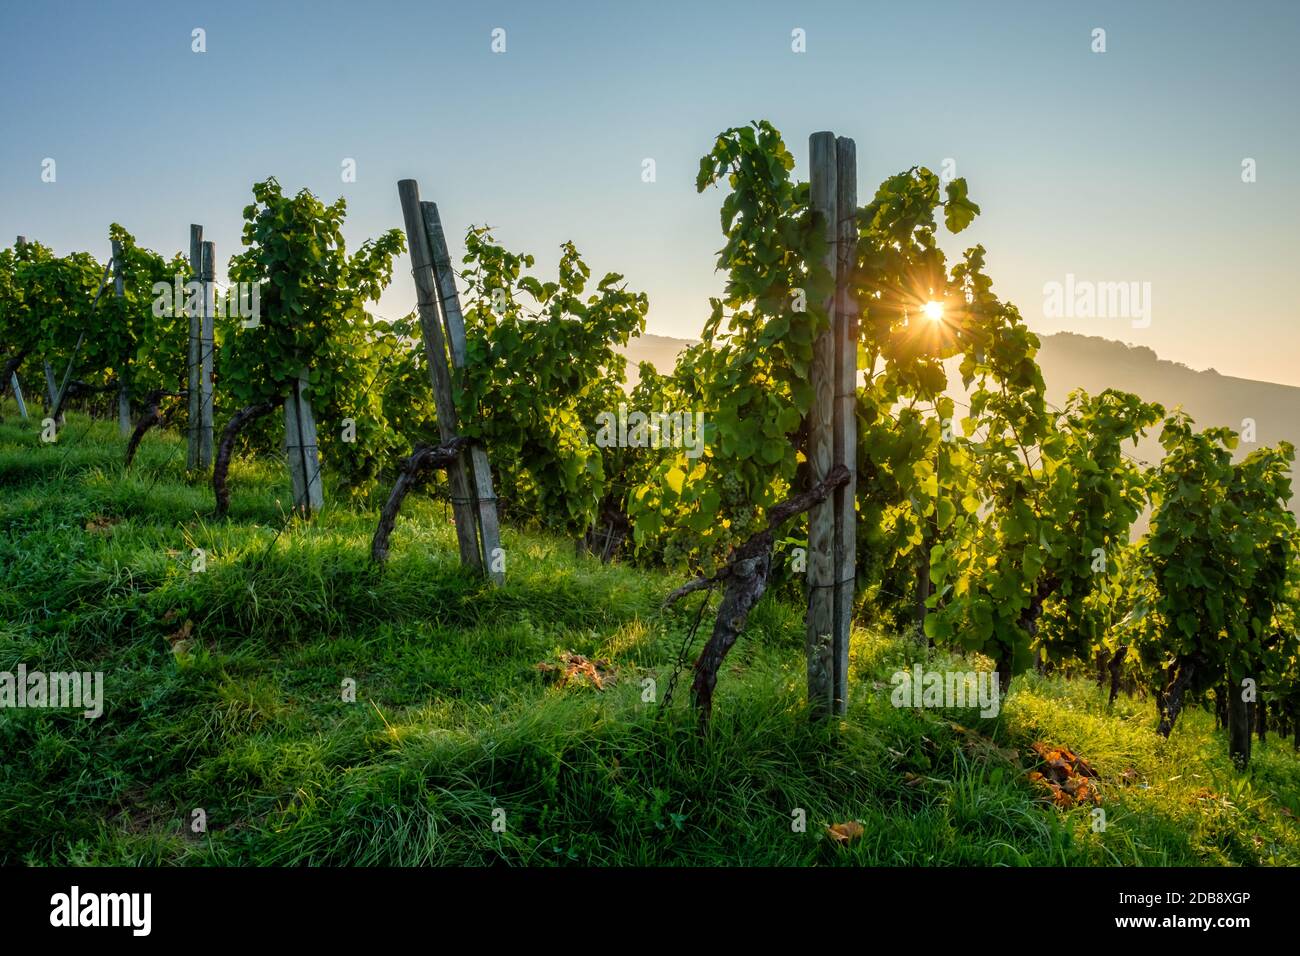 Vineyard with sunstars sunbeams in the morning landscape Stock Photo